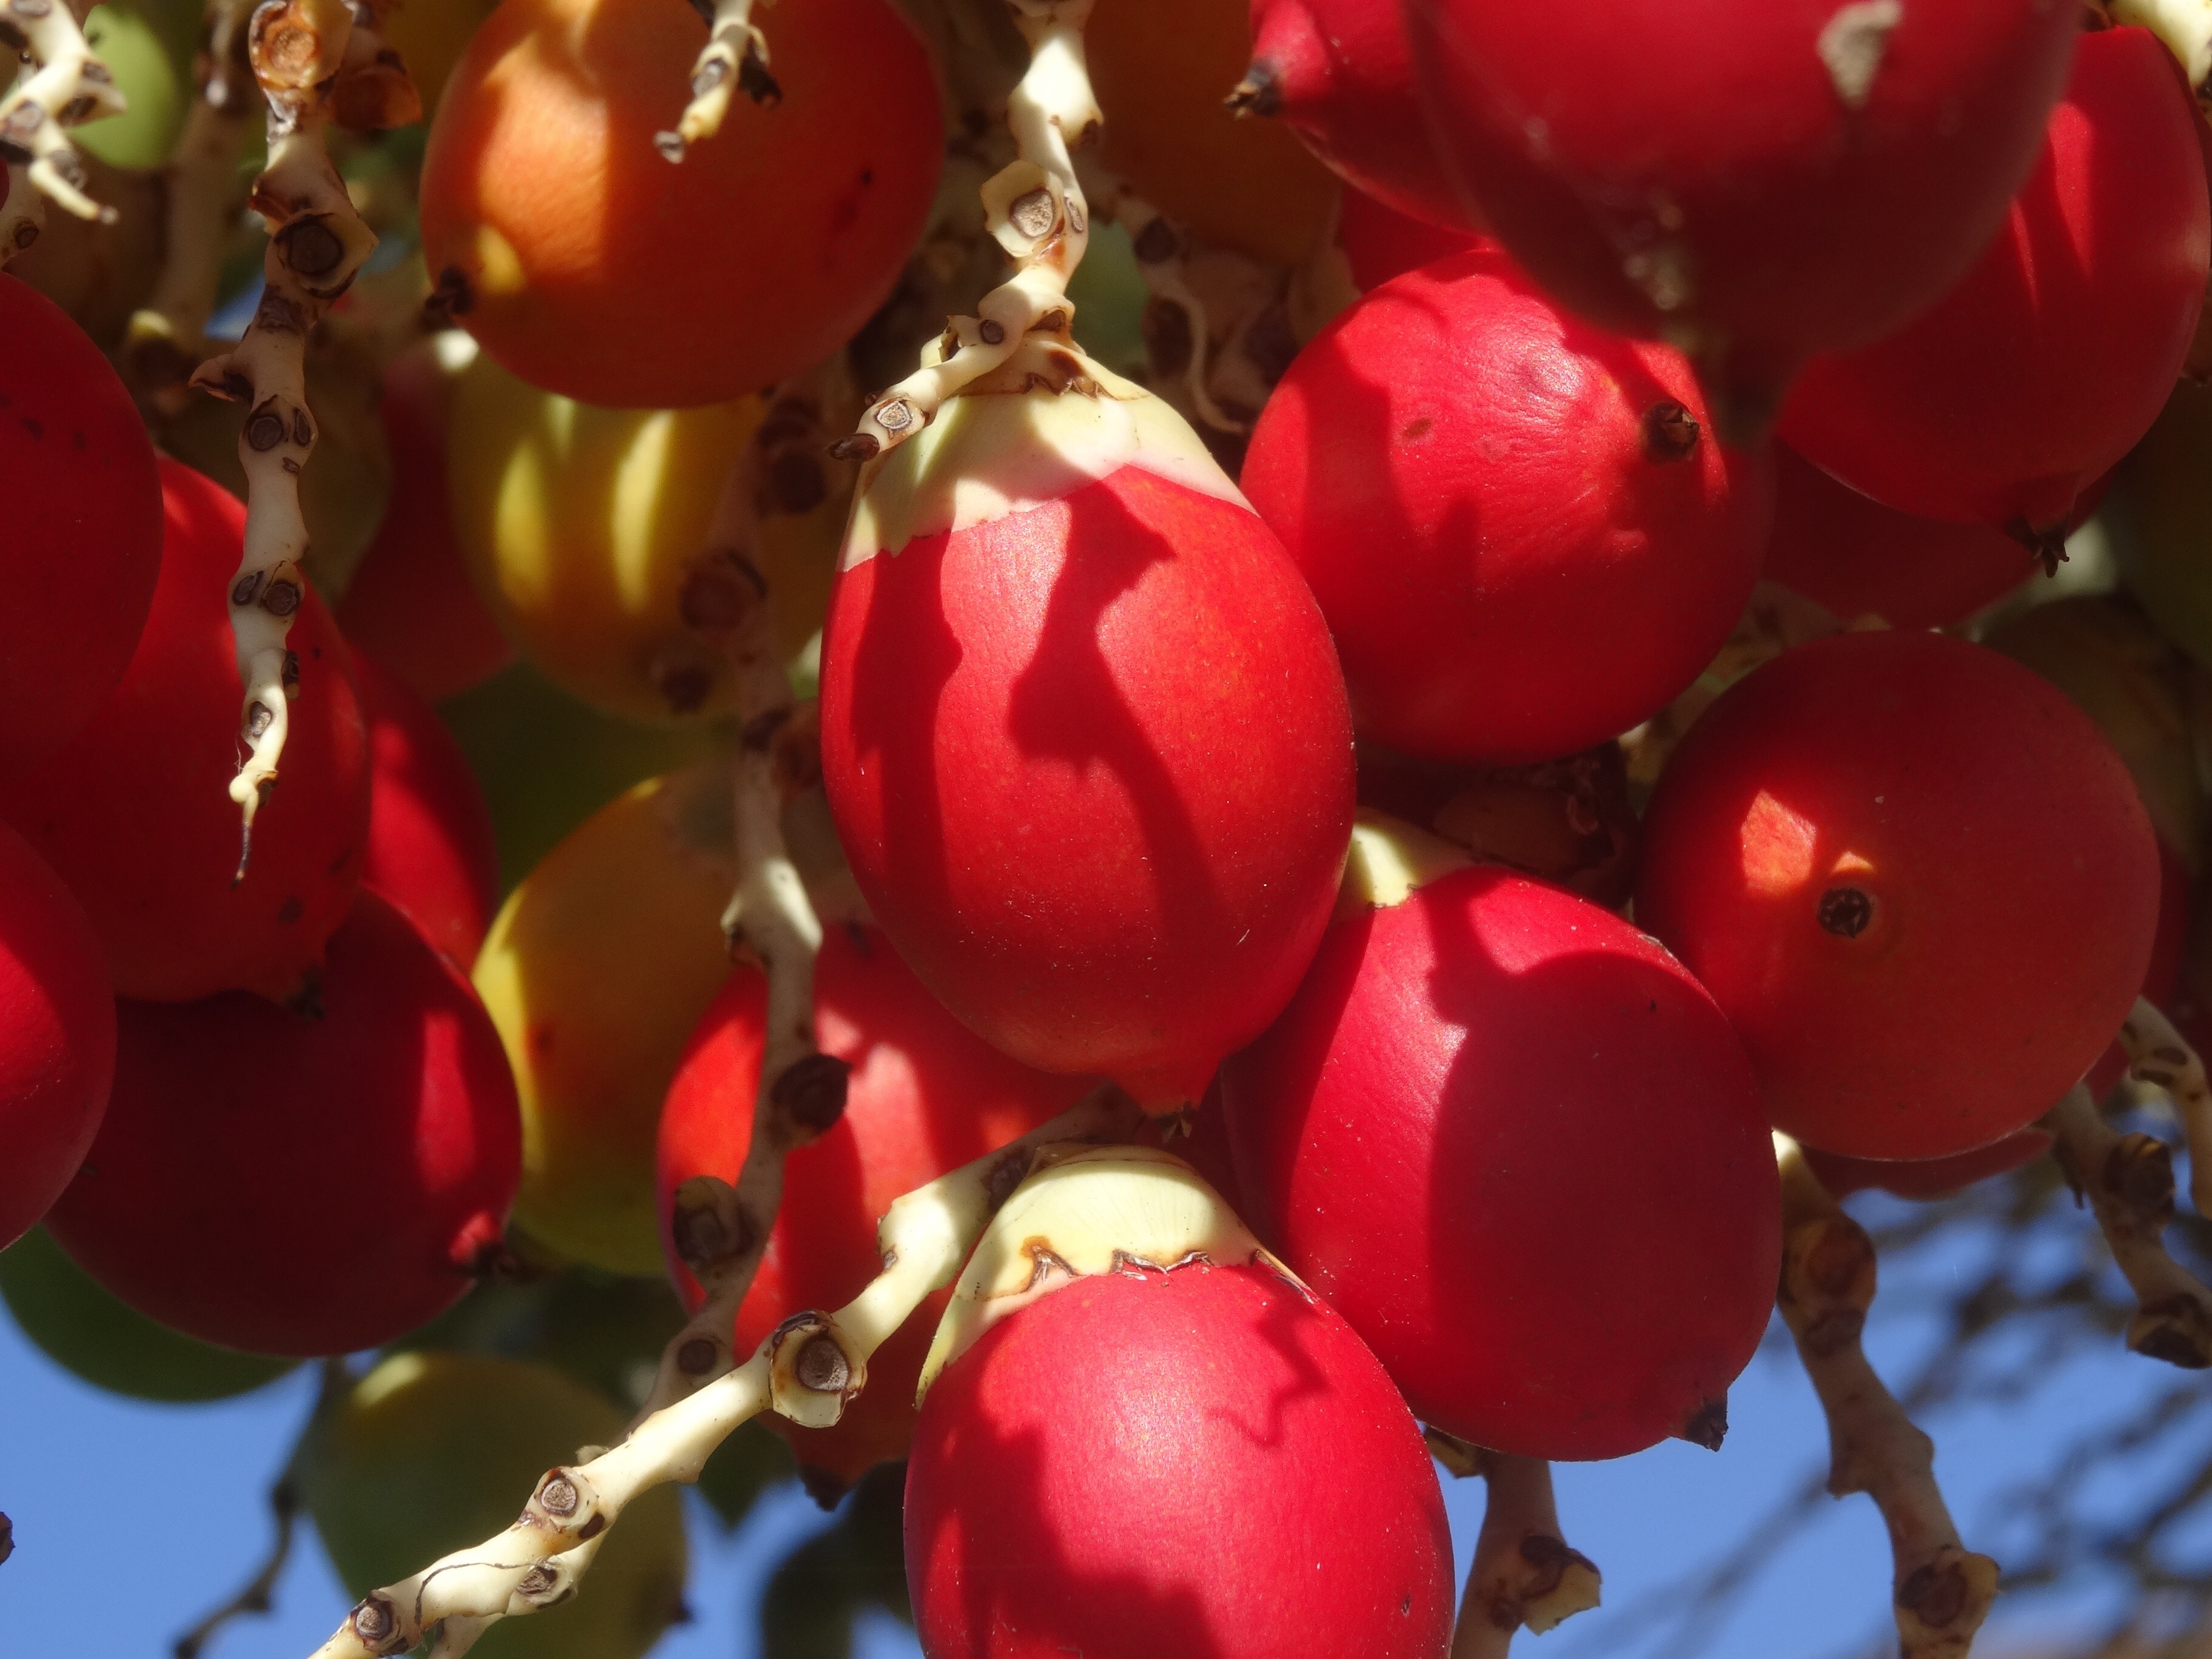 red and round fruits